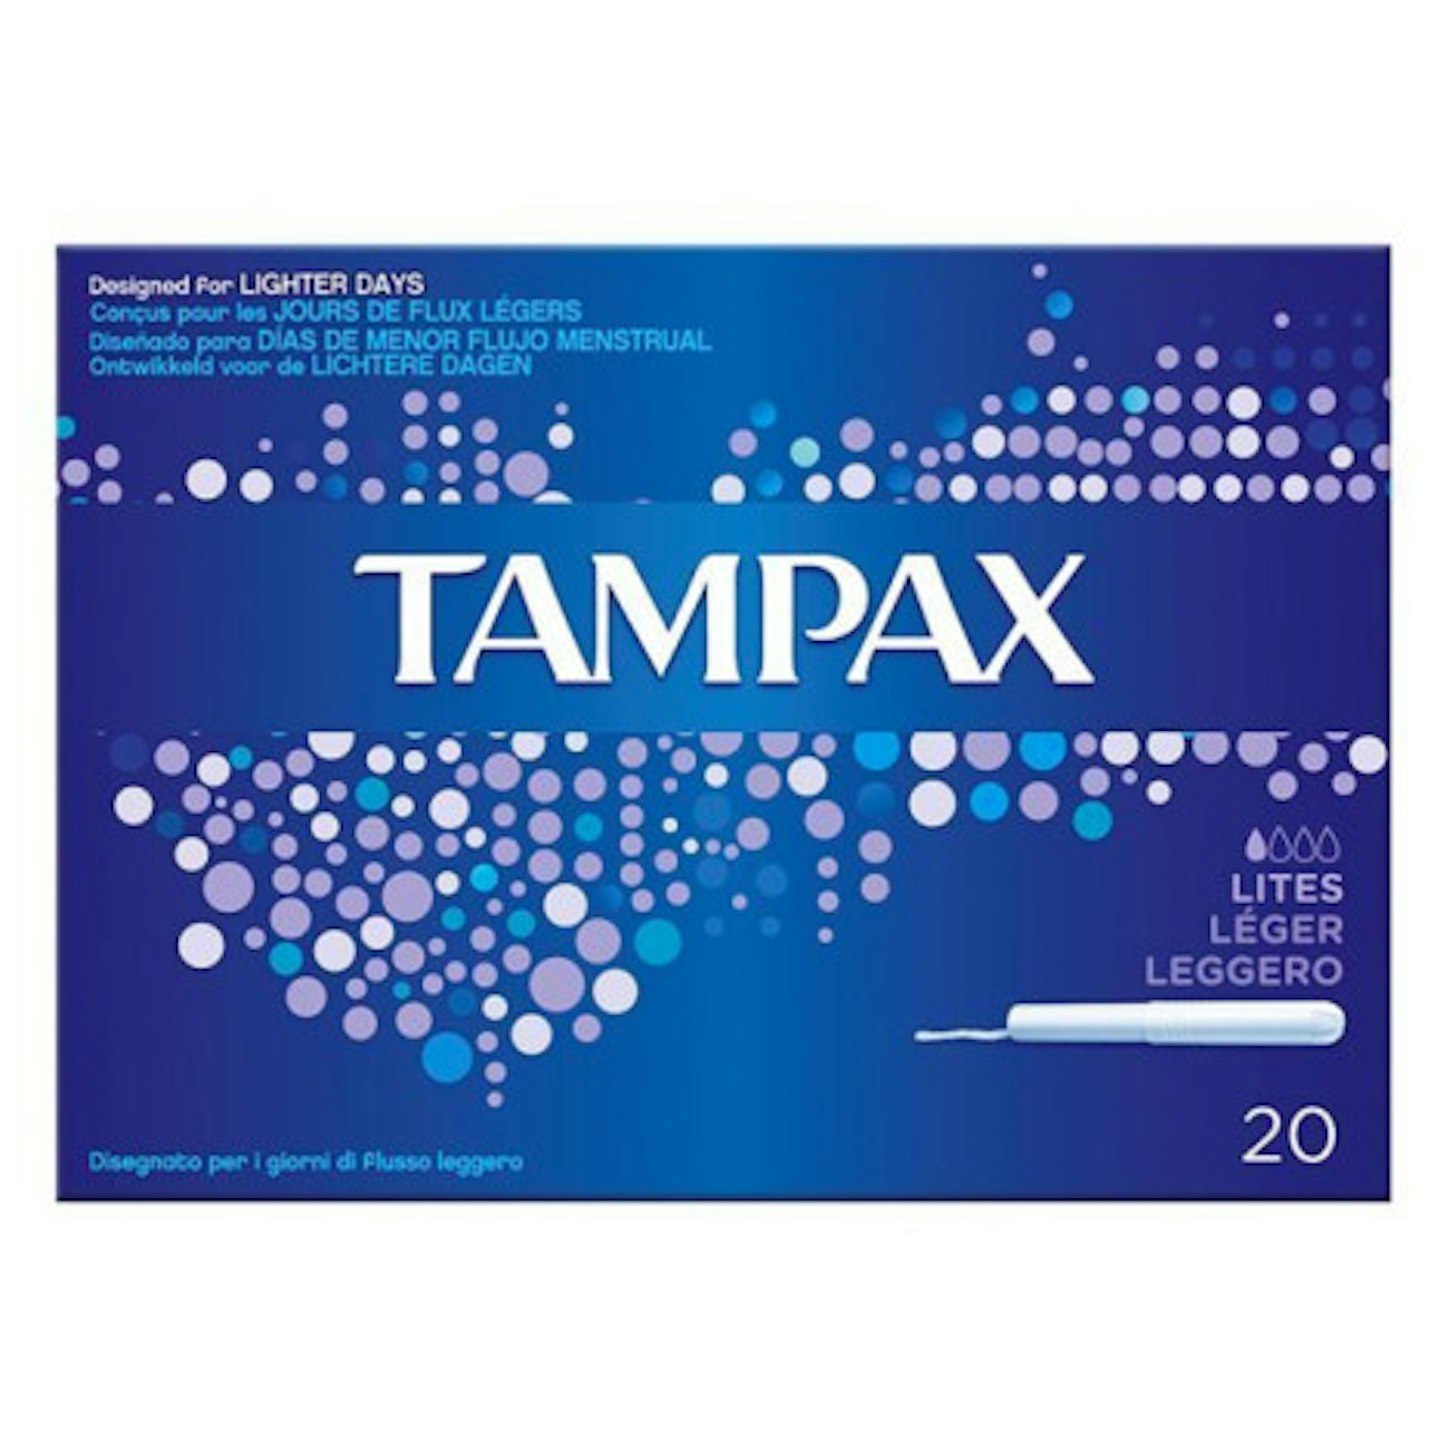 Although unexplained and unconfirmed, it's thought the use of tampons can increase the risk of TSS